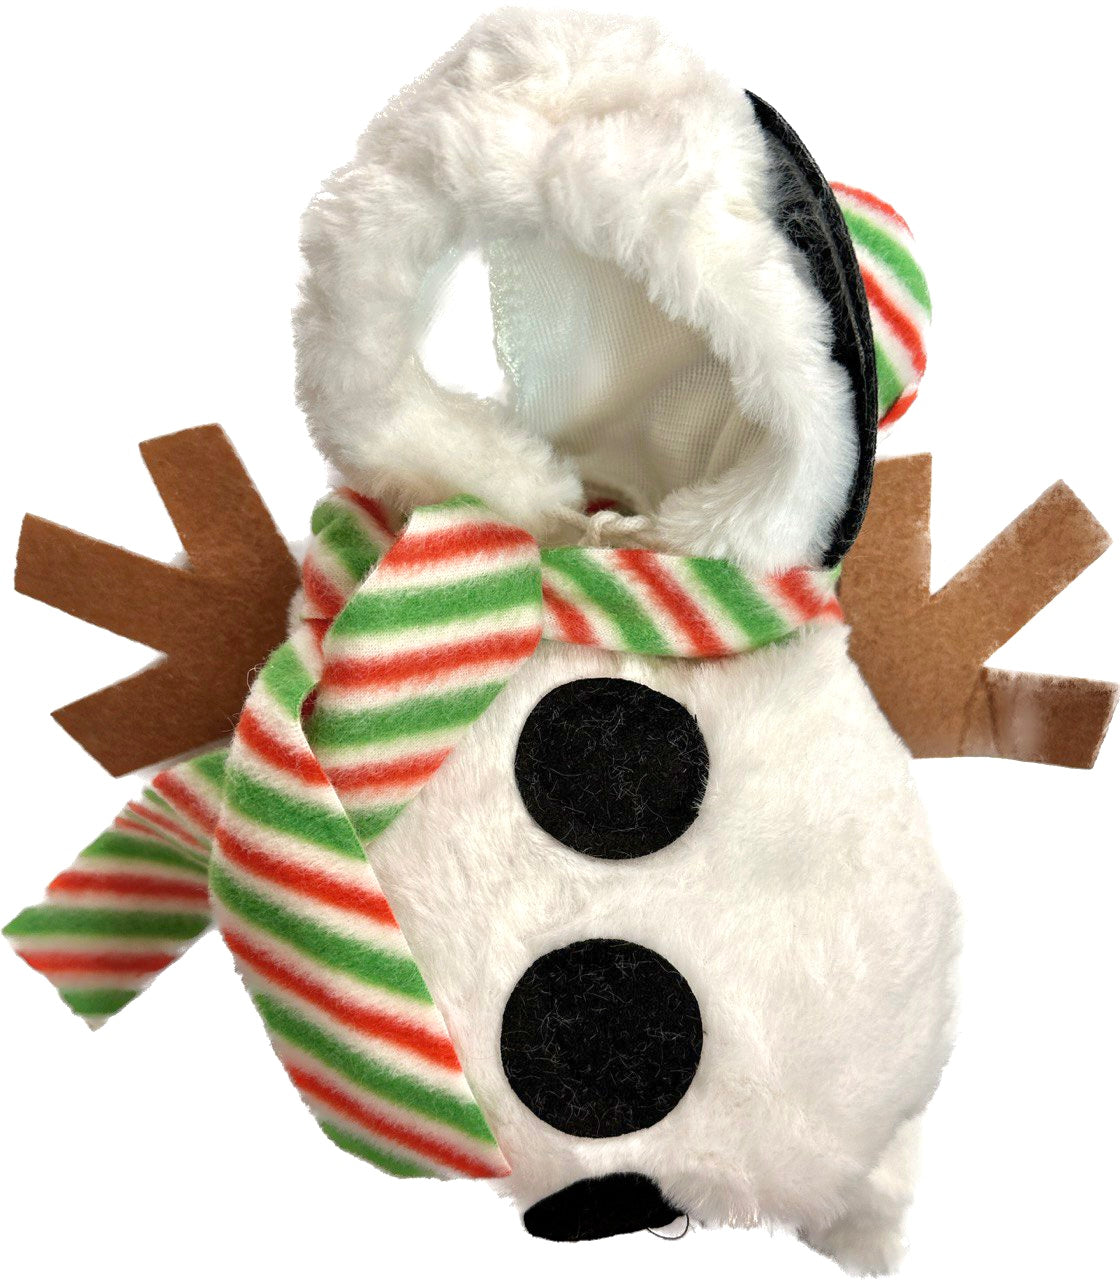 Snowman Costume for a Small Dogs